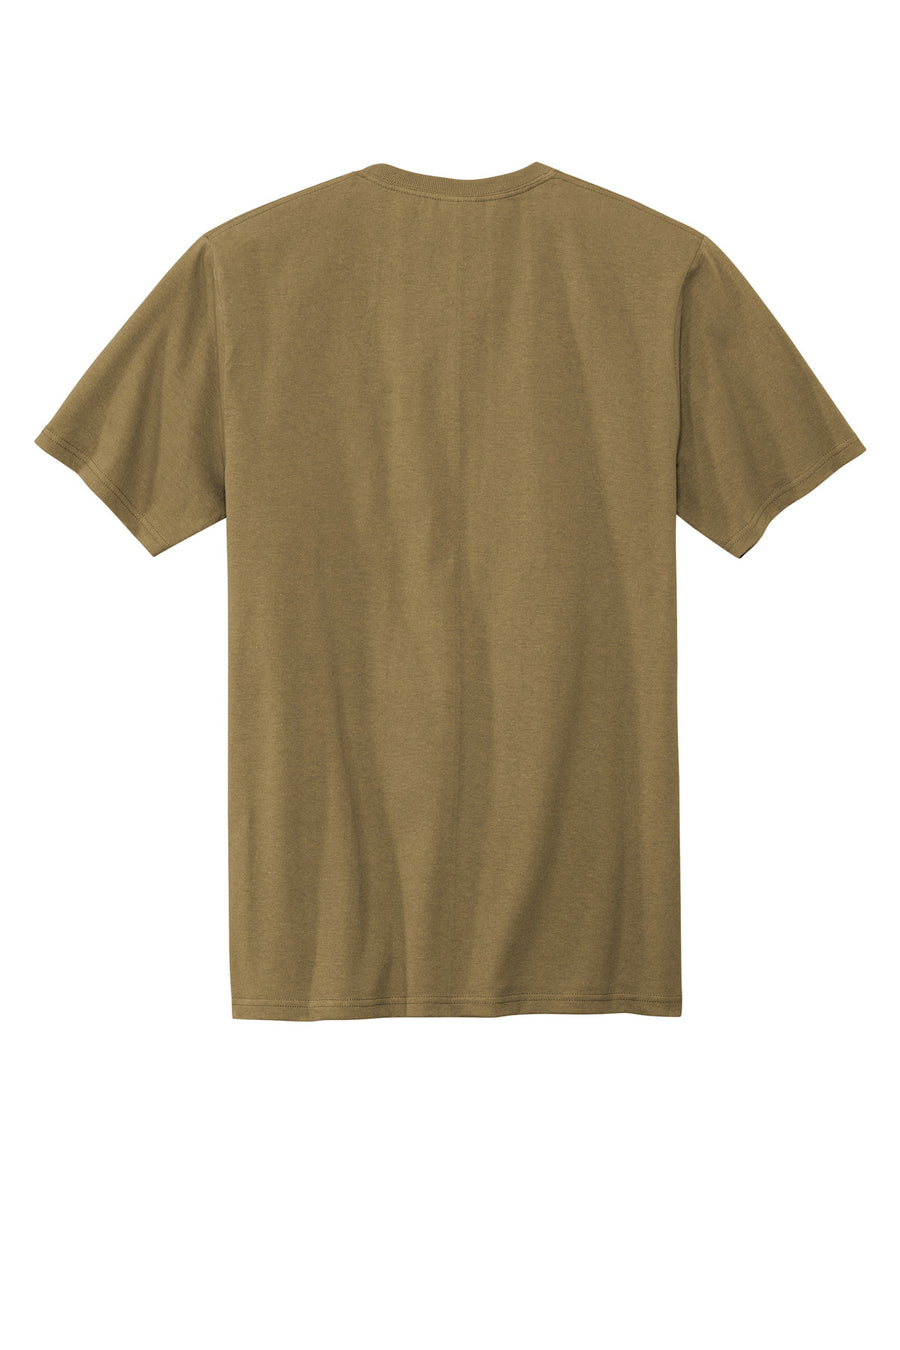 VL100-Coyote Brown-front_flat